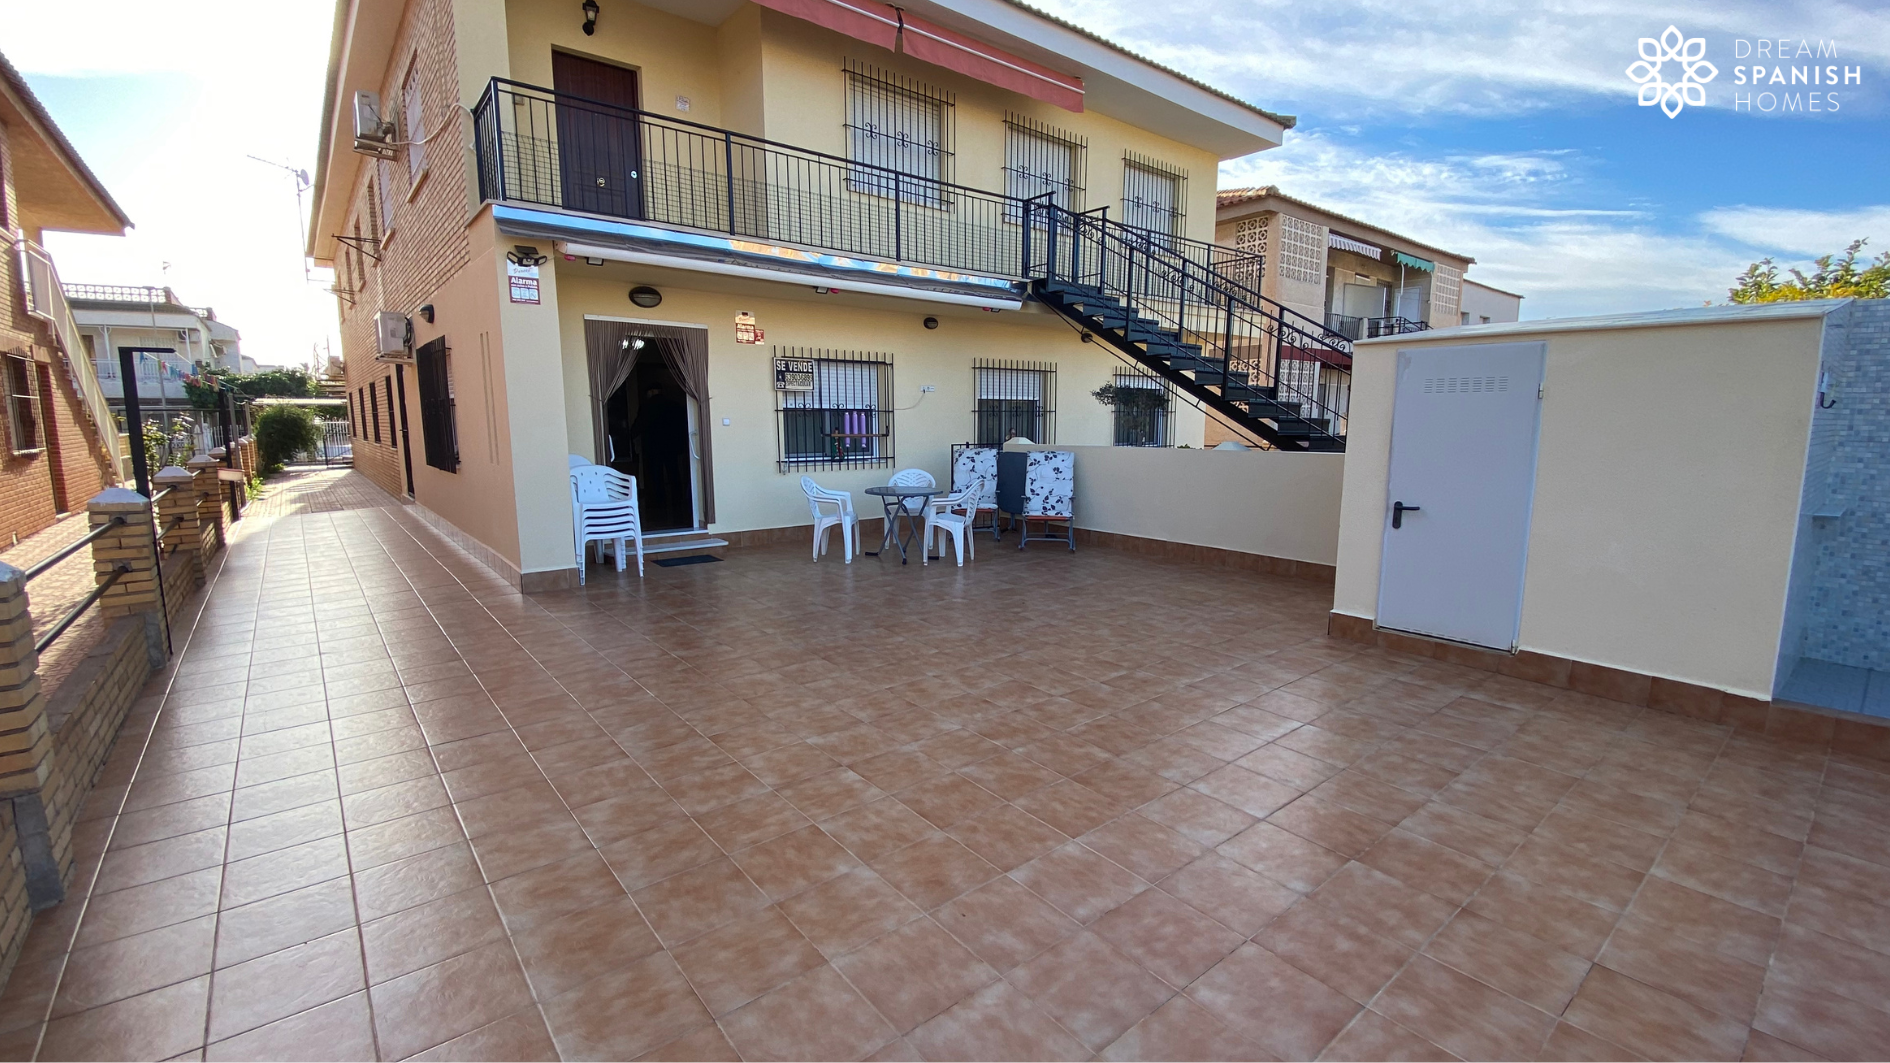 Los Alcazares – 3 Bed Ground Floor Apartment 150mtr from the beach (C)